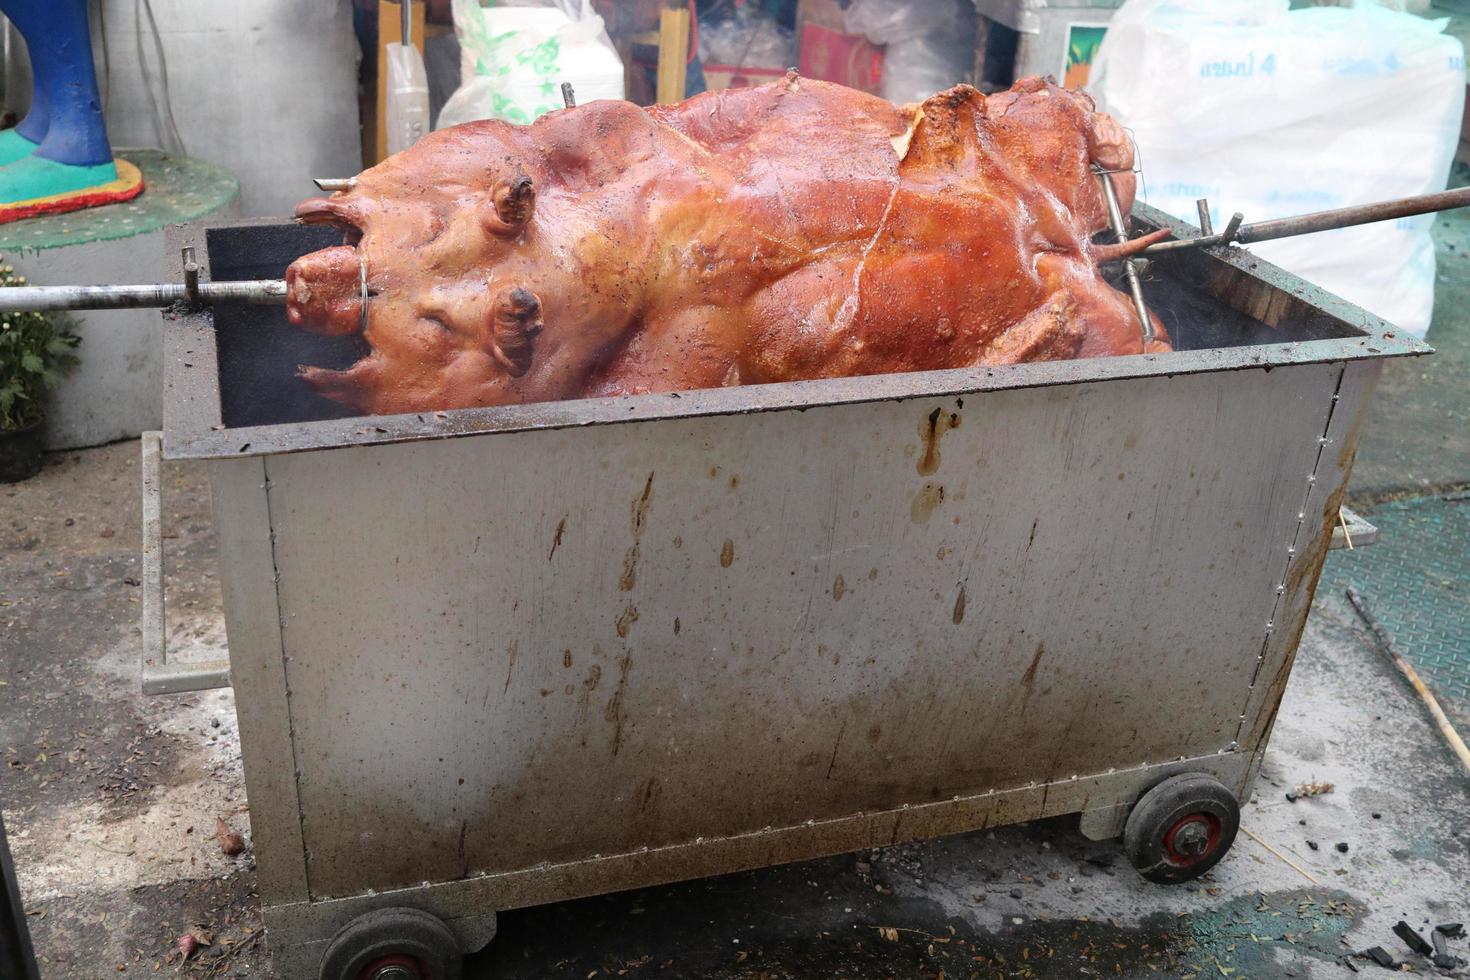 Whole pig grilling on stove. photo